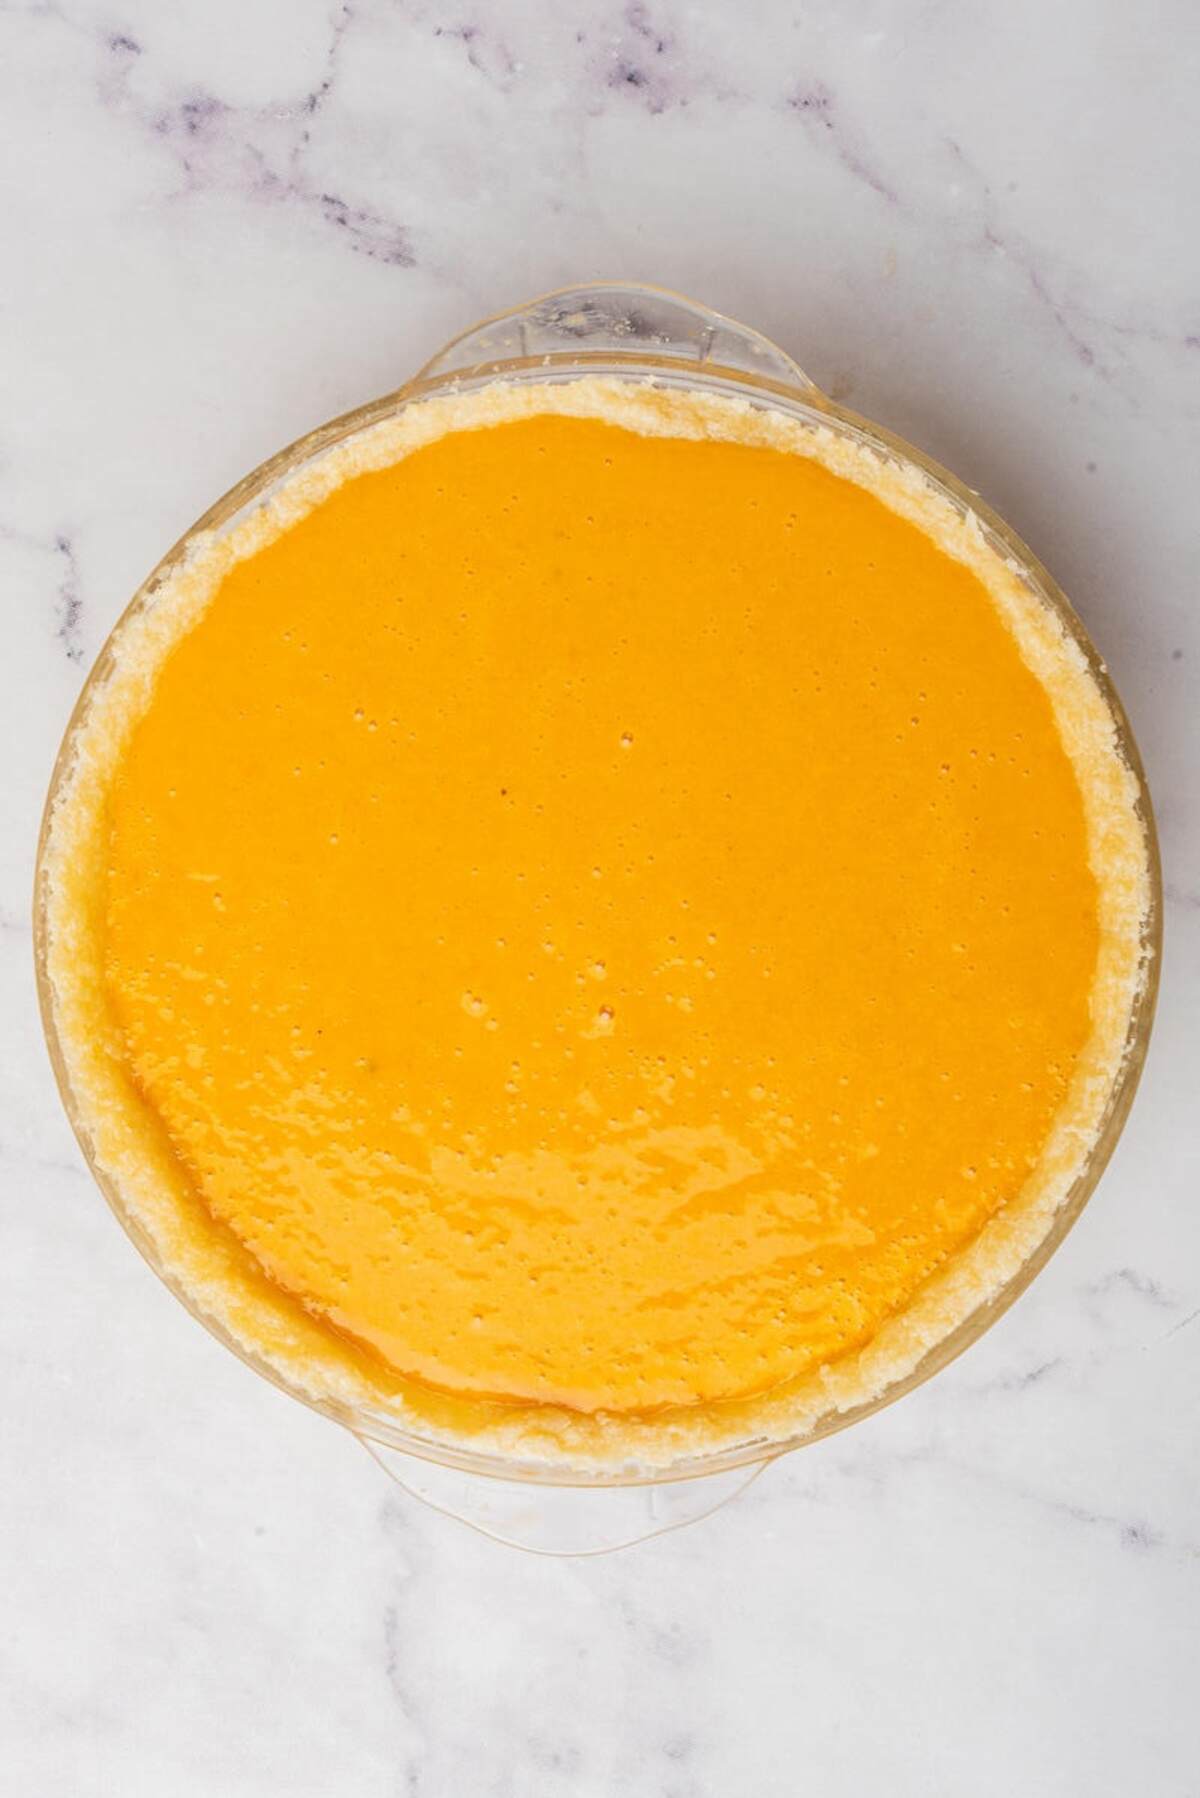 A filled pie crust with smooth pumpkin filling, ready for baking.